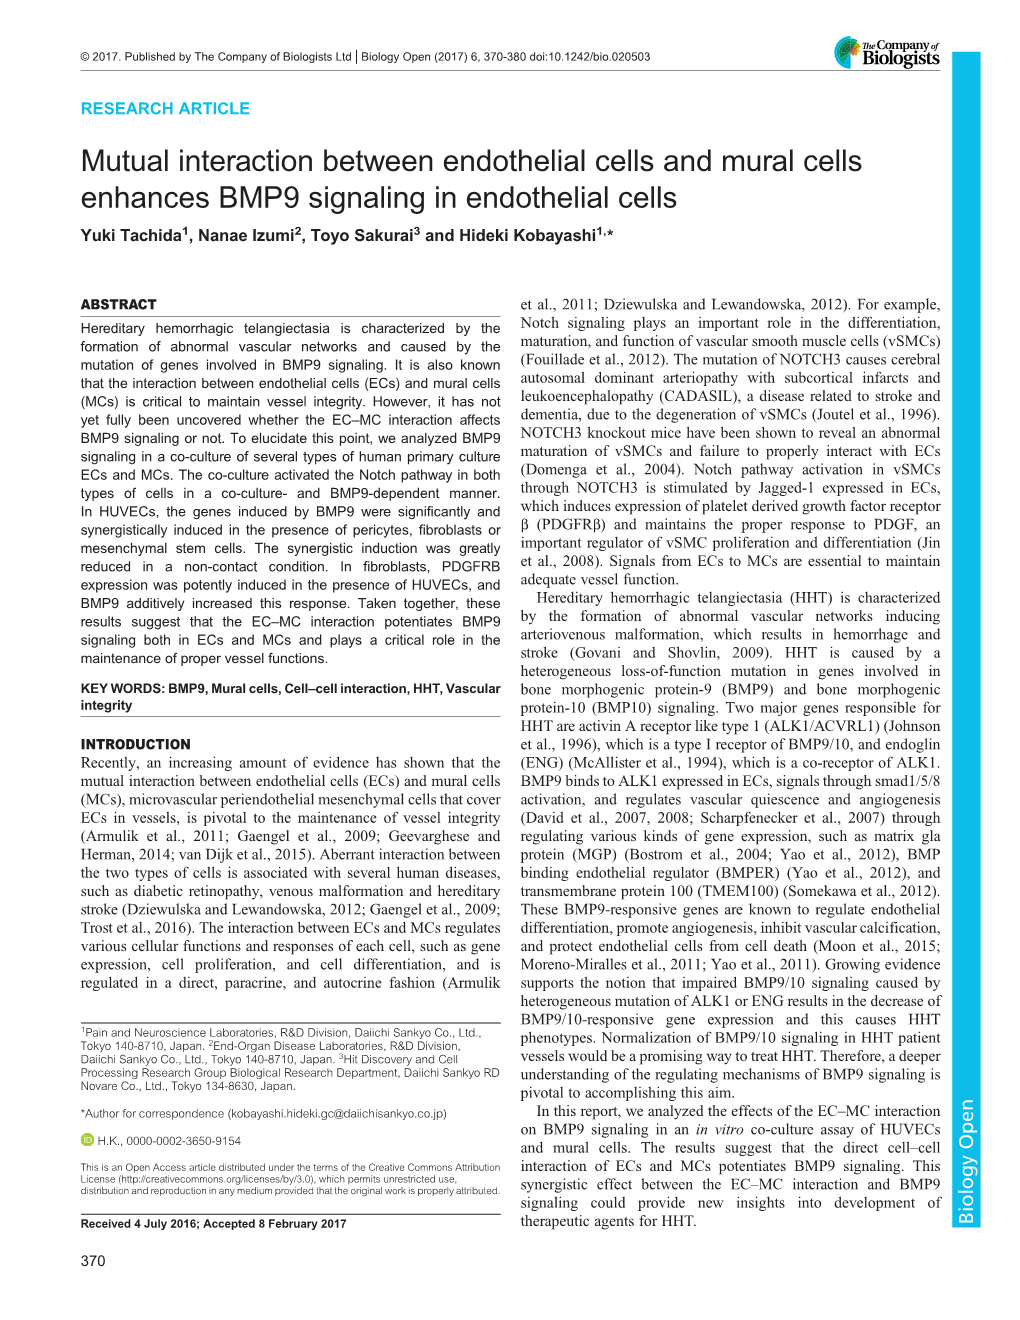 Mutual Interaction Between Endothelial Cells and Mural Cells